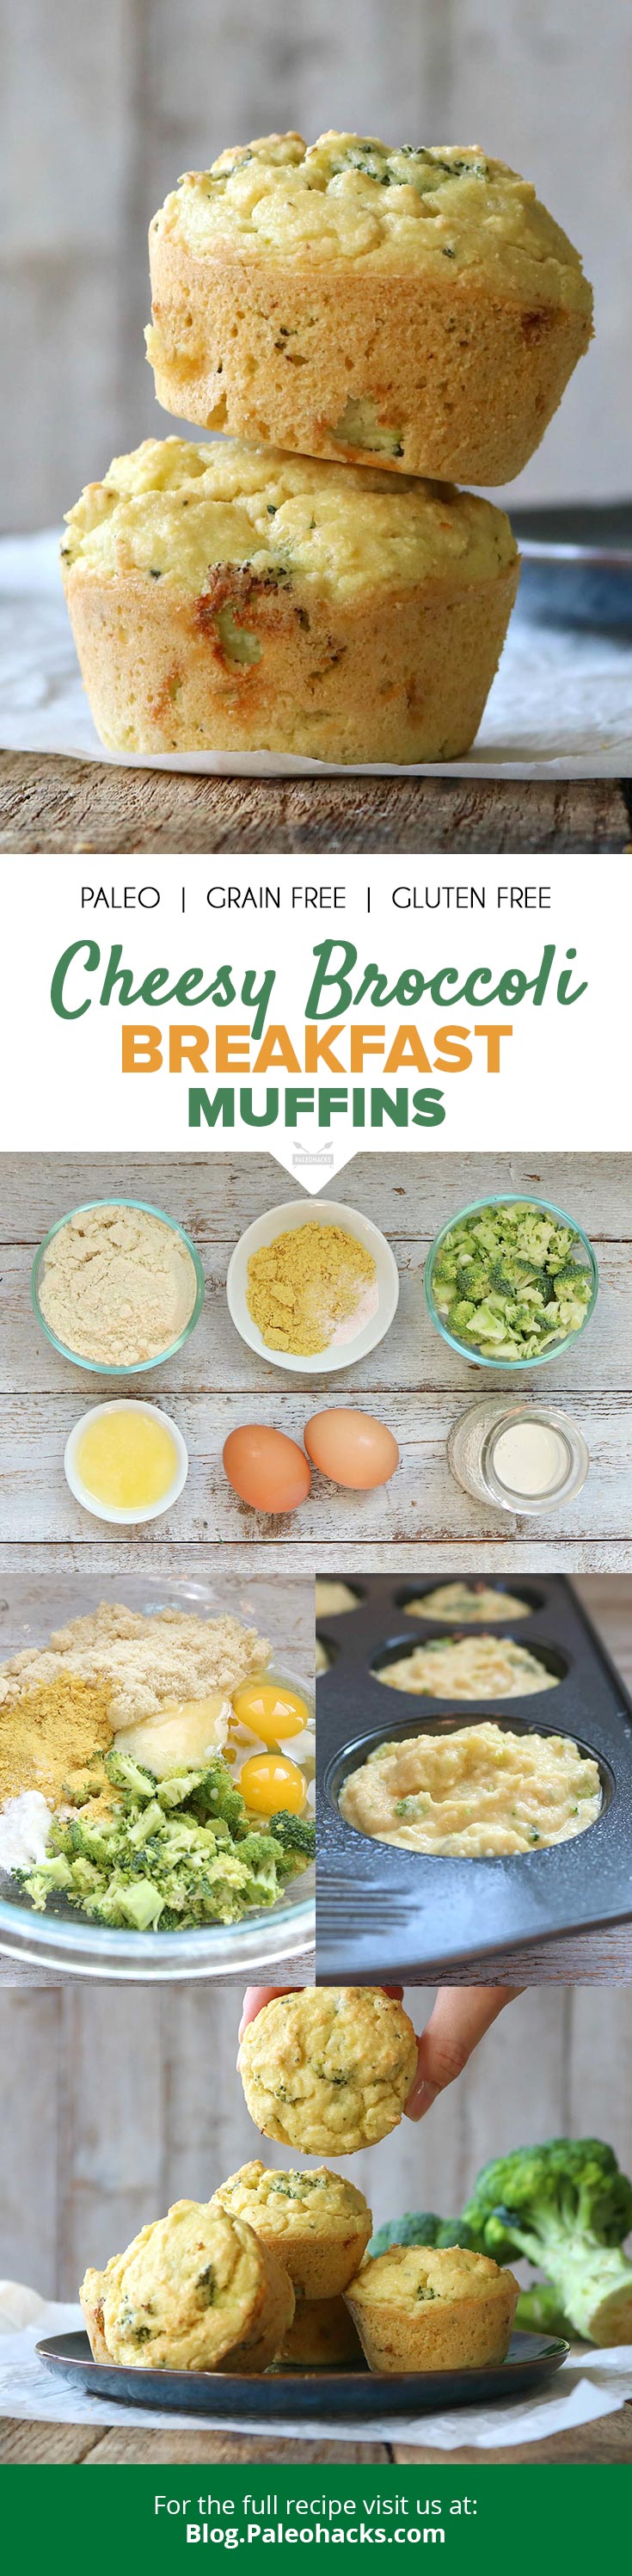 These warm, grain-free treats taste like broccoli cheddar soup in a muffin! Munch on these broccoli cheddar muffins for breakfast or with a cozy bowl of soup.